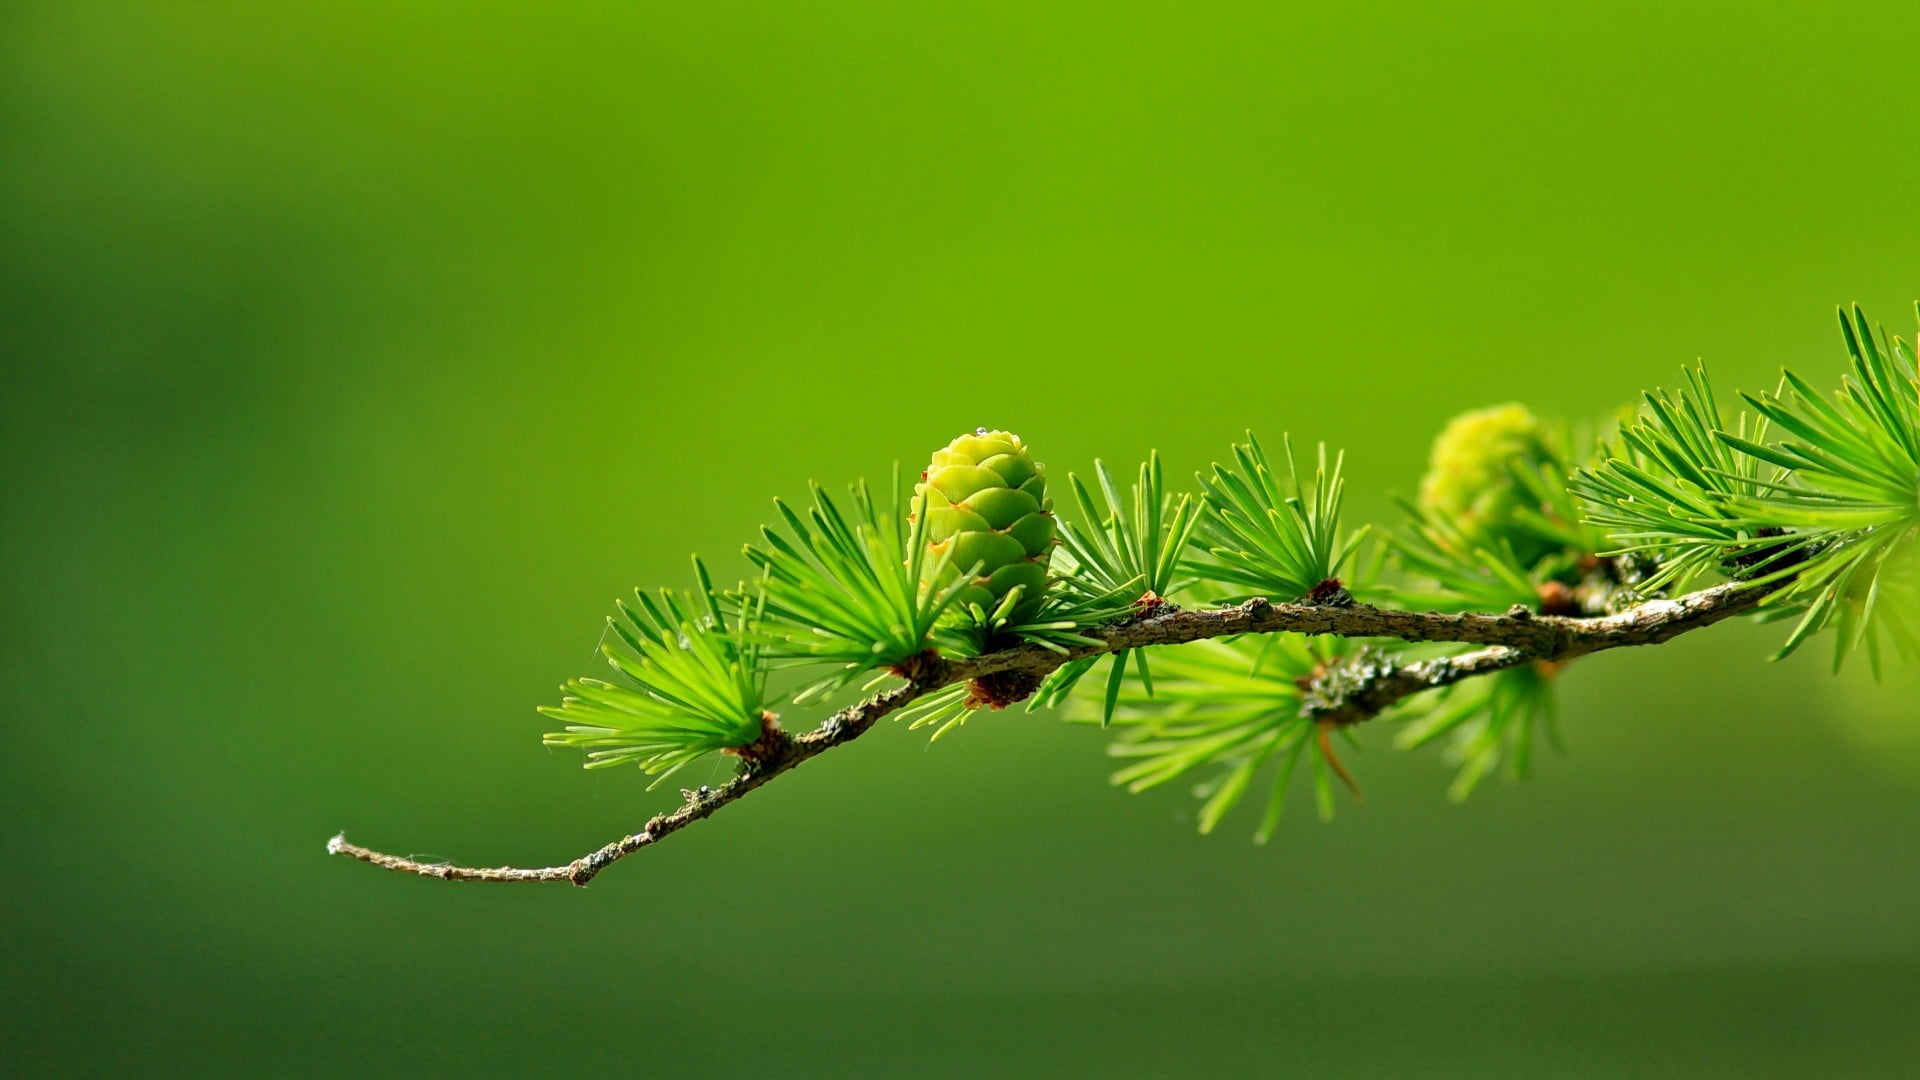 Wallpaper green leafed plant, conifer, cones, macro, blurred, photography